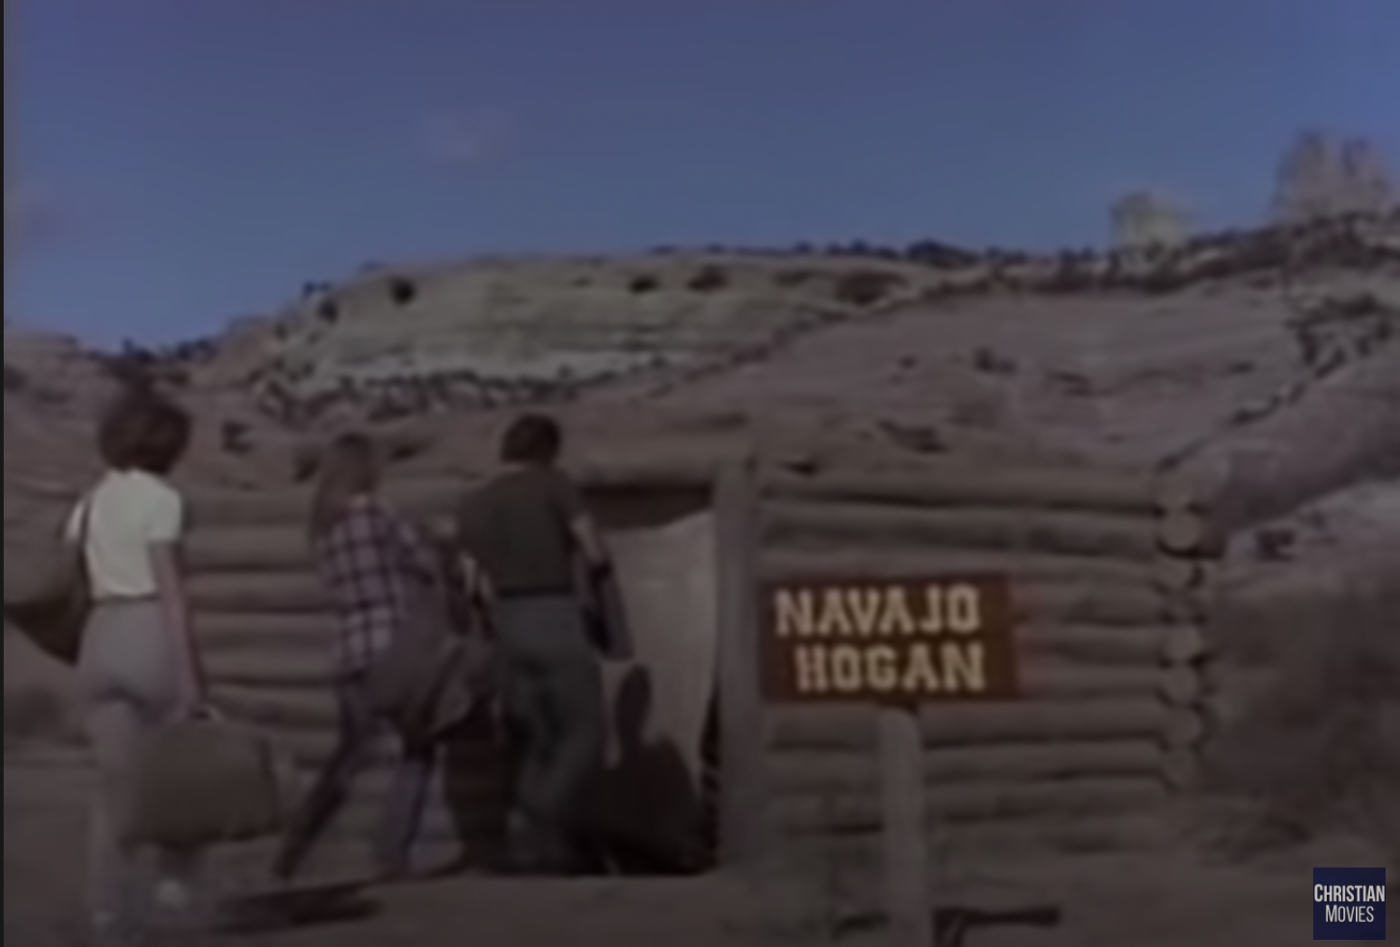 The crew entering a log dwelling with a sign in front of it that reads "Navajo hogan."